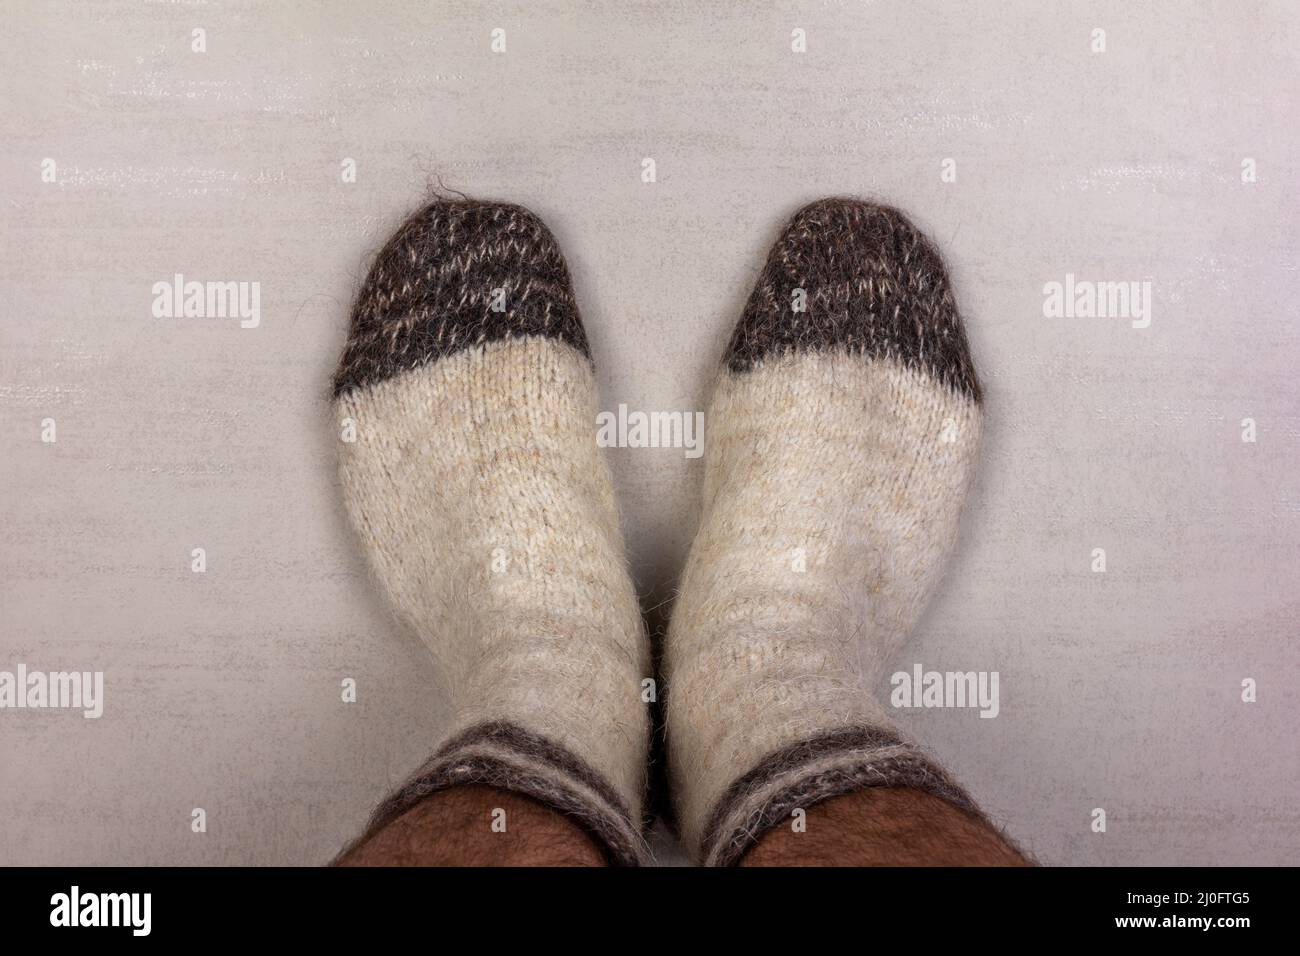 Men's feet in white knitted wool socks close-up Stock Photo